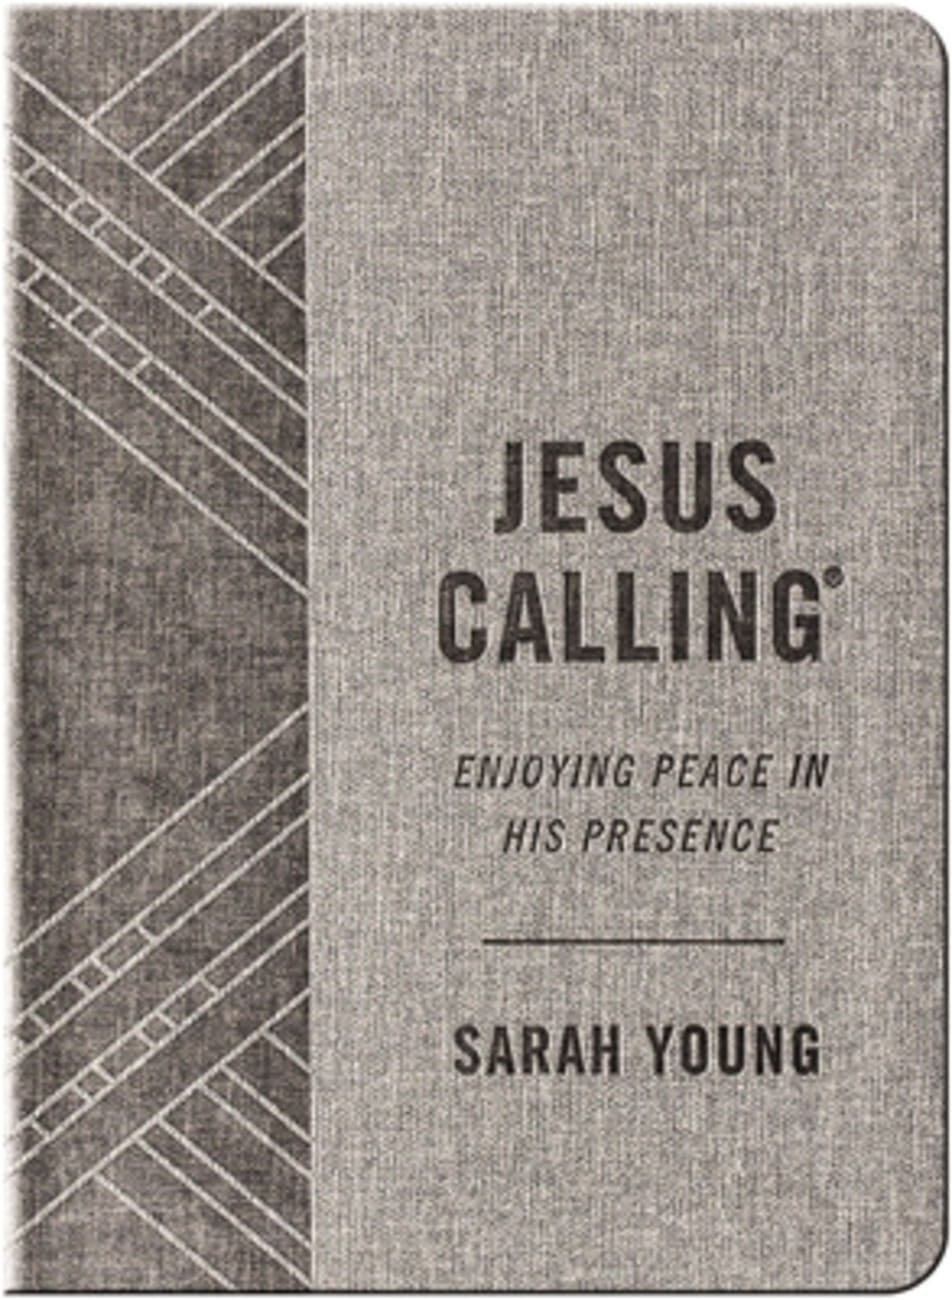 Jesus Calling: Enjoying Peace in His Presence (With Full Scriptures) (Textured Gray) Imitation Leather